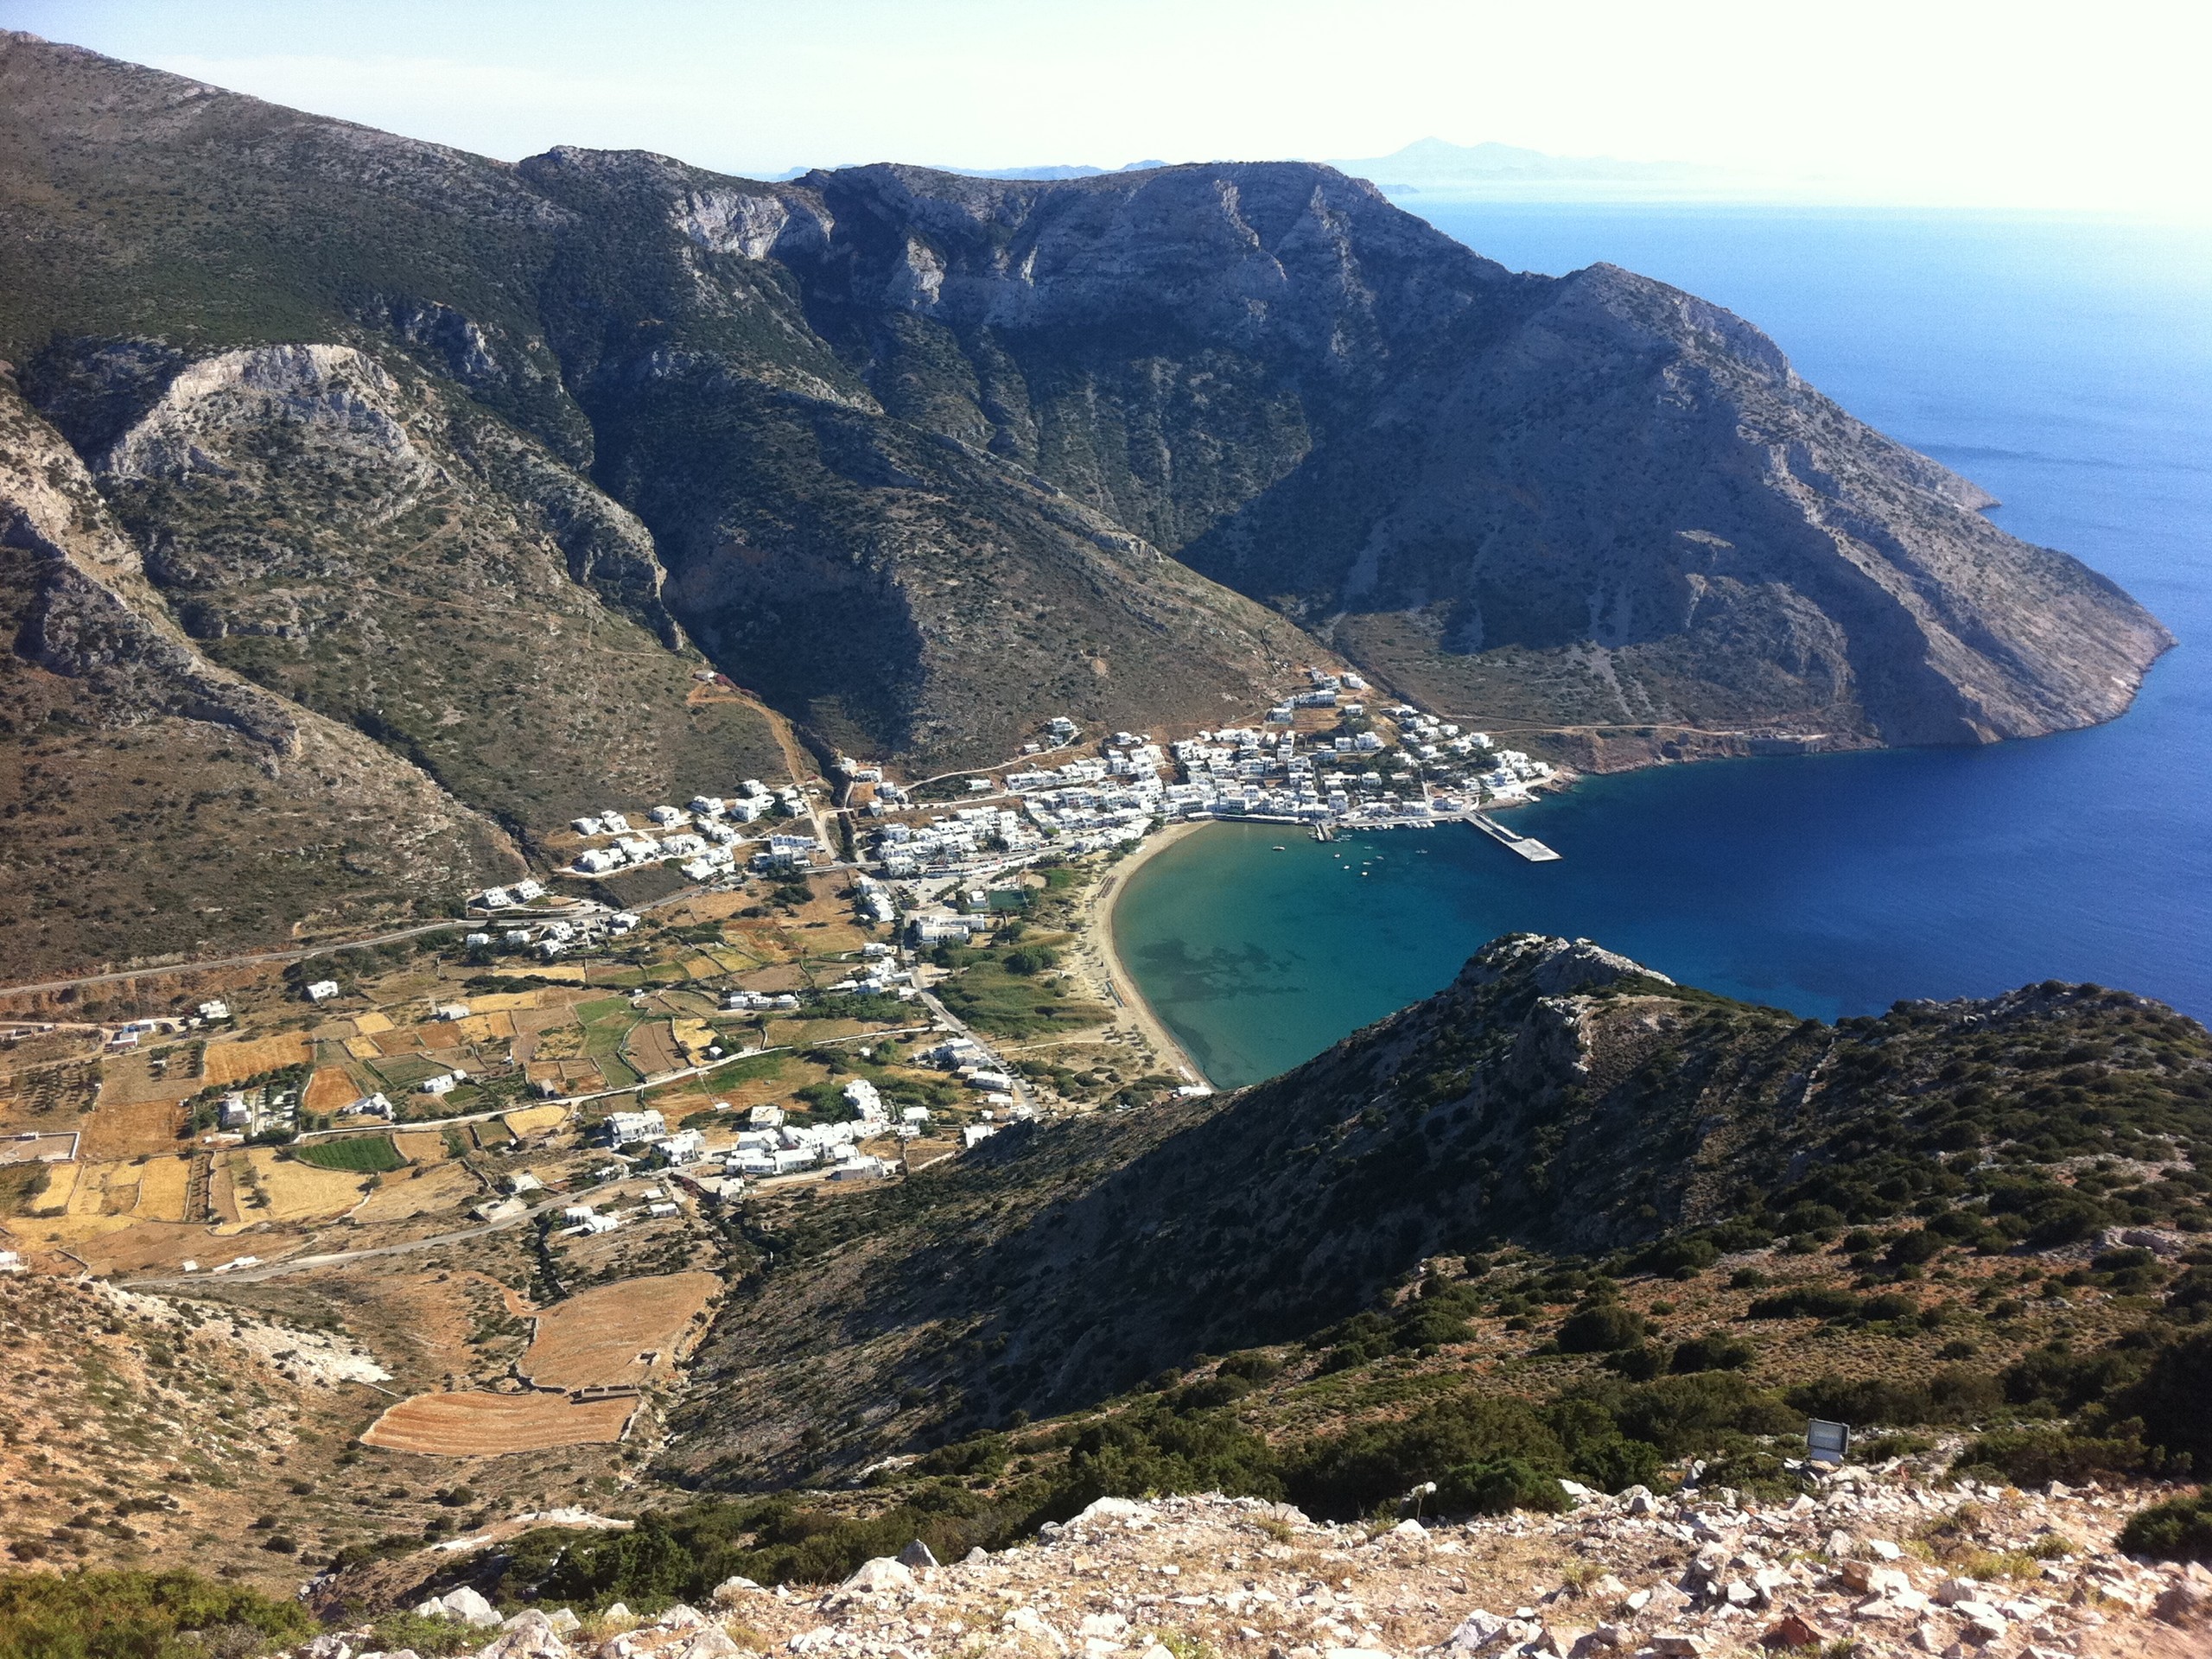 The village and bay of Kamares, Sifnos